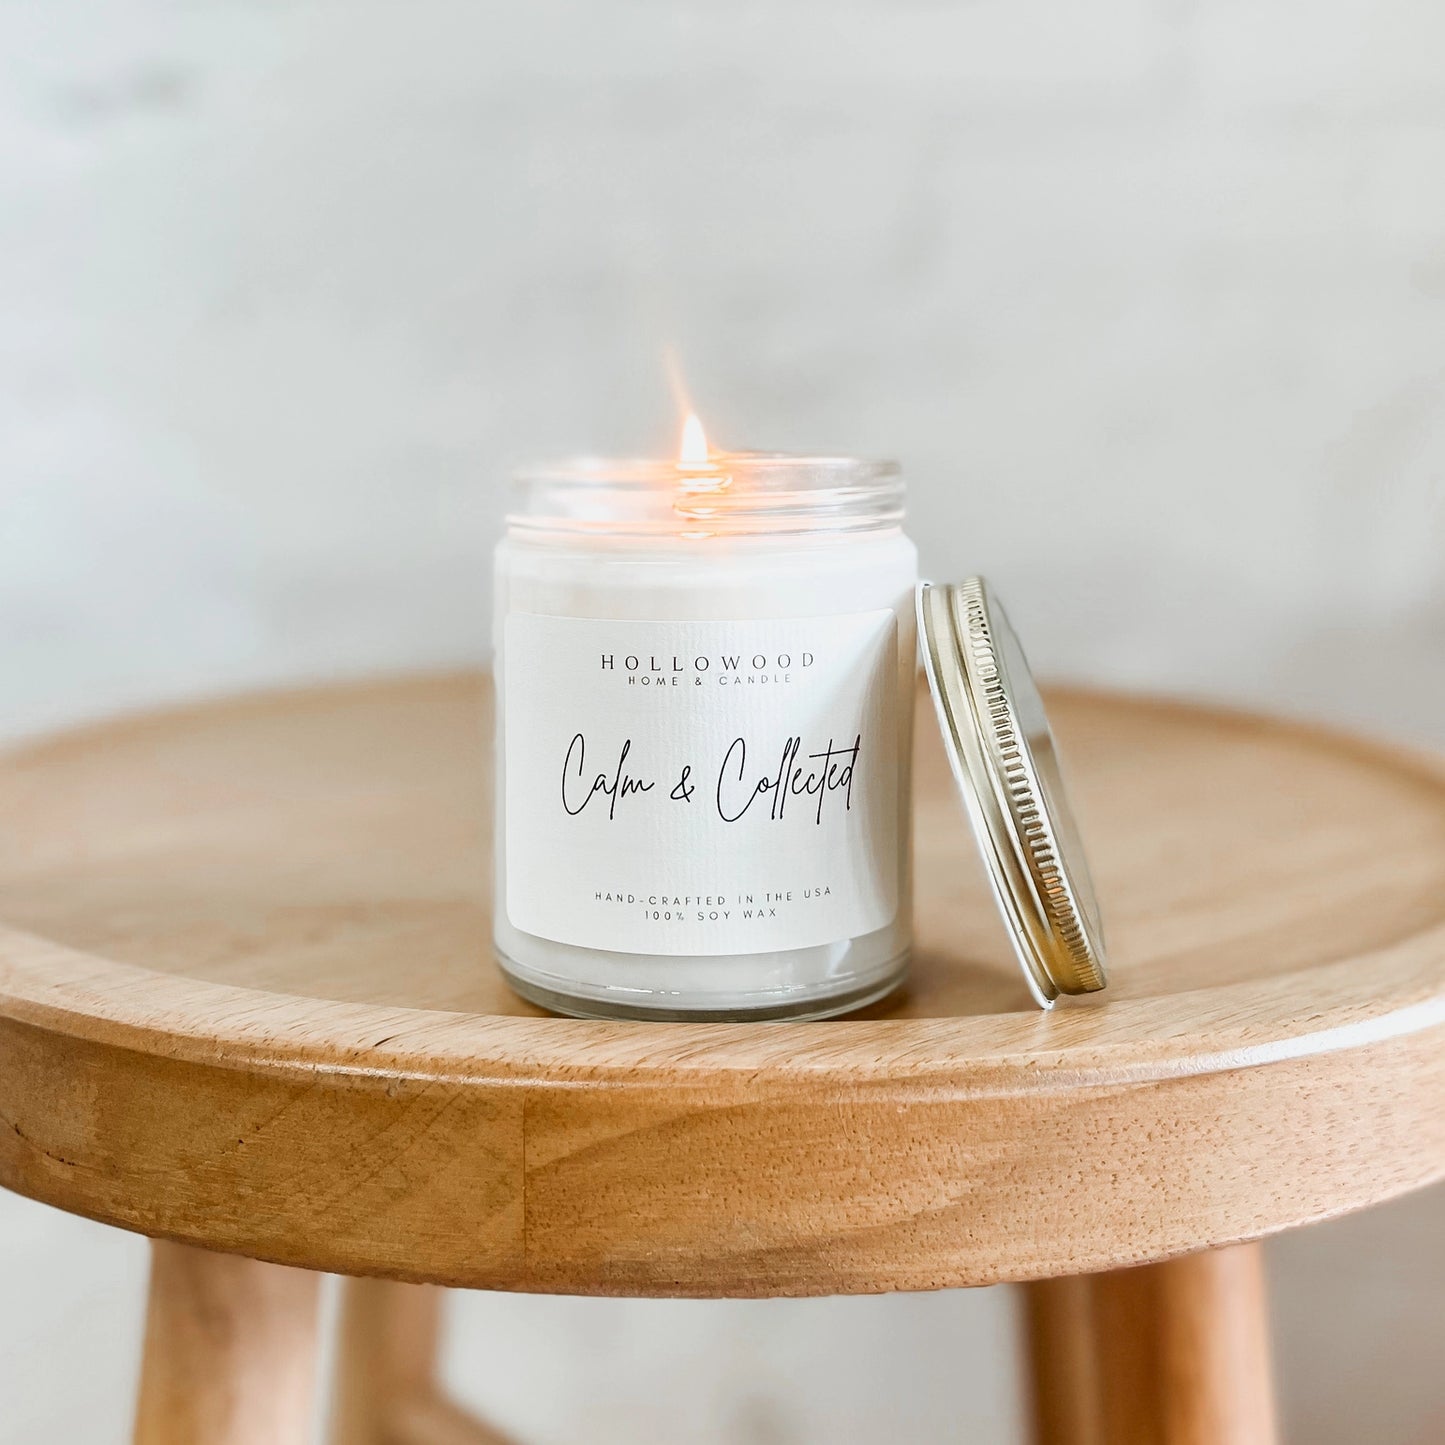 Calm & Collected Candle